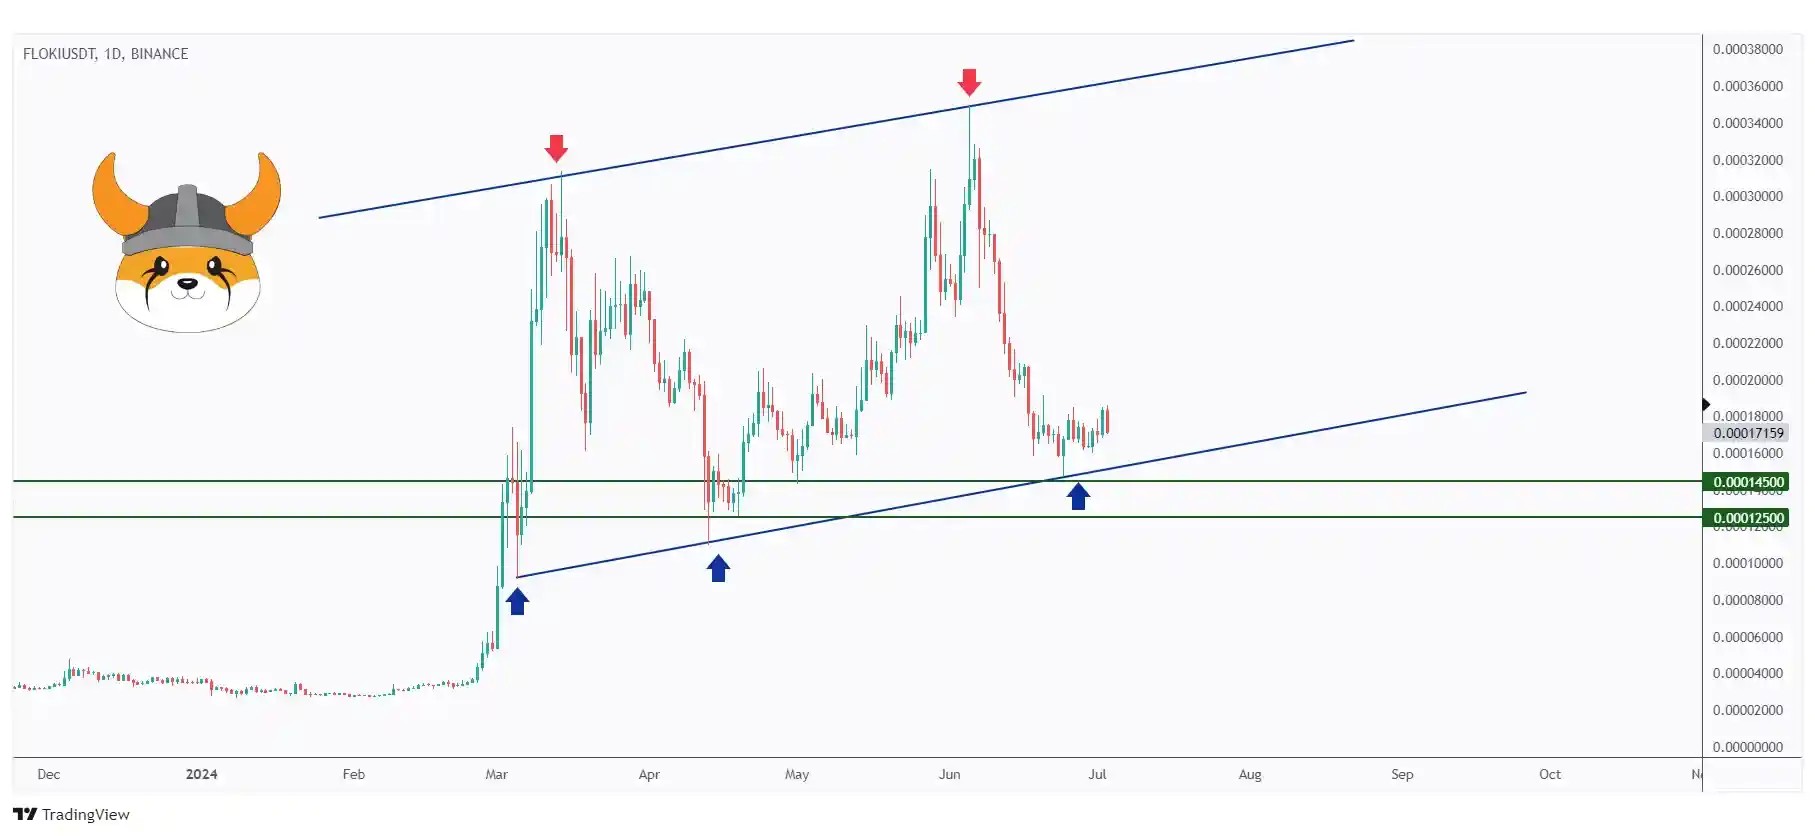 FLOKI daily chart overall bullish trading within the flat rising channel and currently retesting the lower bound of it.